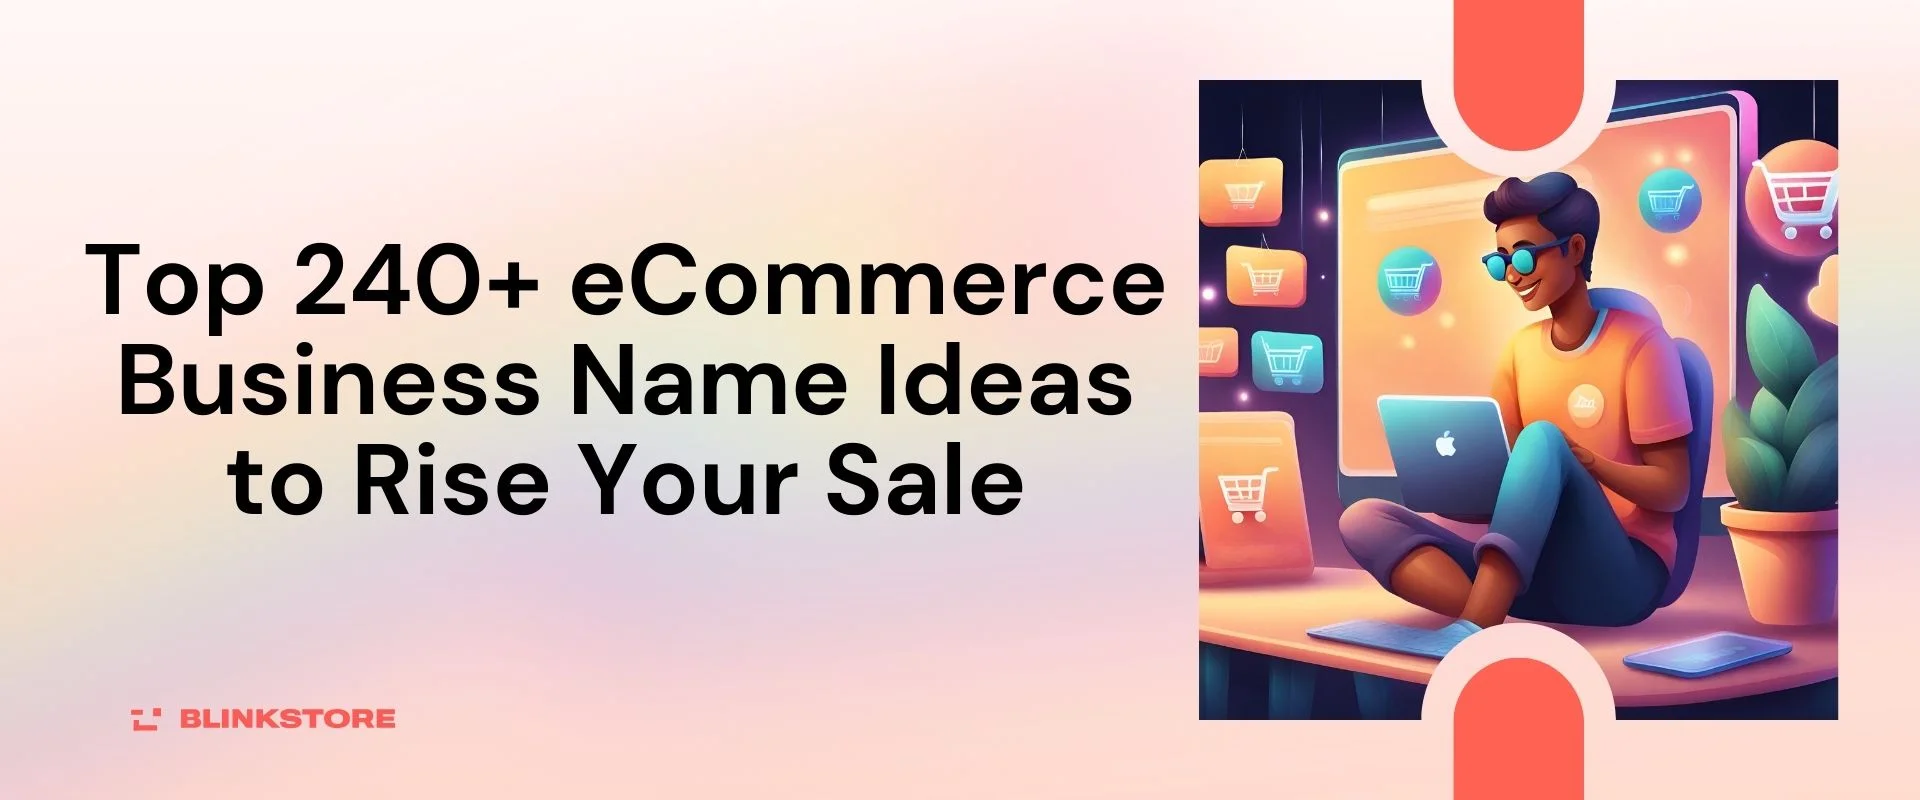 ecommerce business name ideas